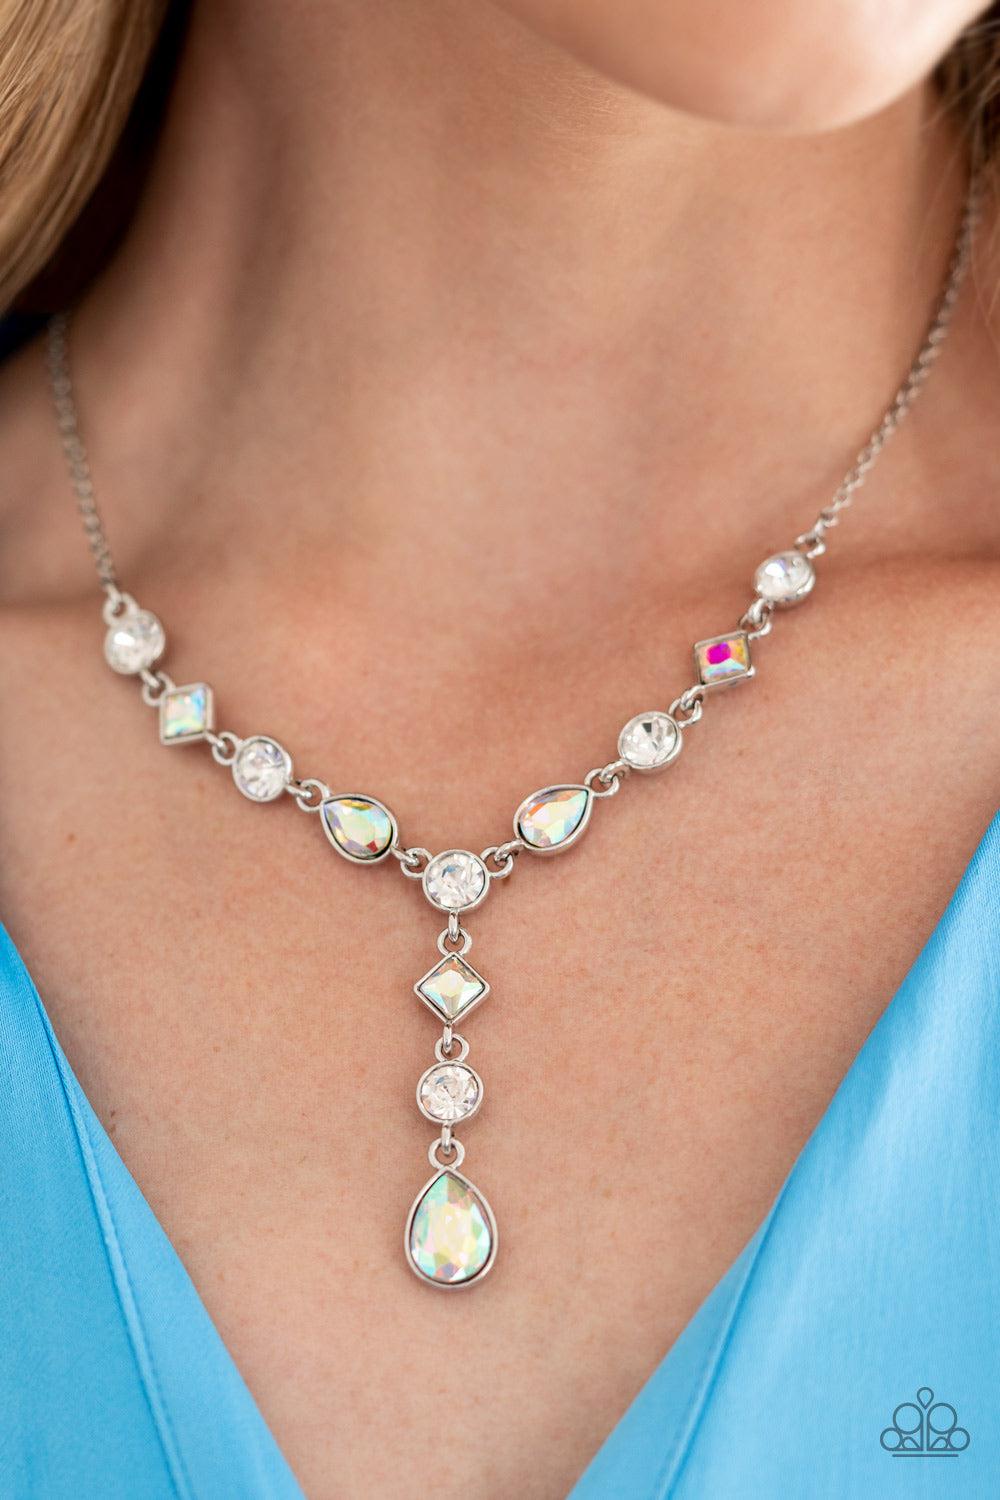 Forget the Crown Multi Iridescent Gem Necklace - Paparazzi Accessories-on model - CarasShop.com - $5 Jewelry by Cara Jewels